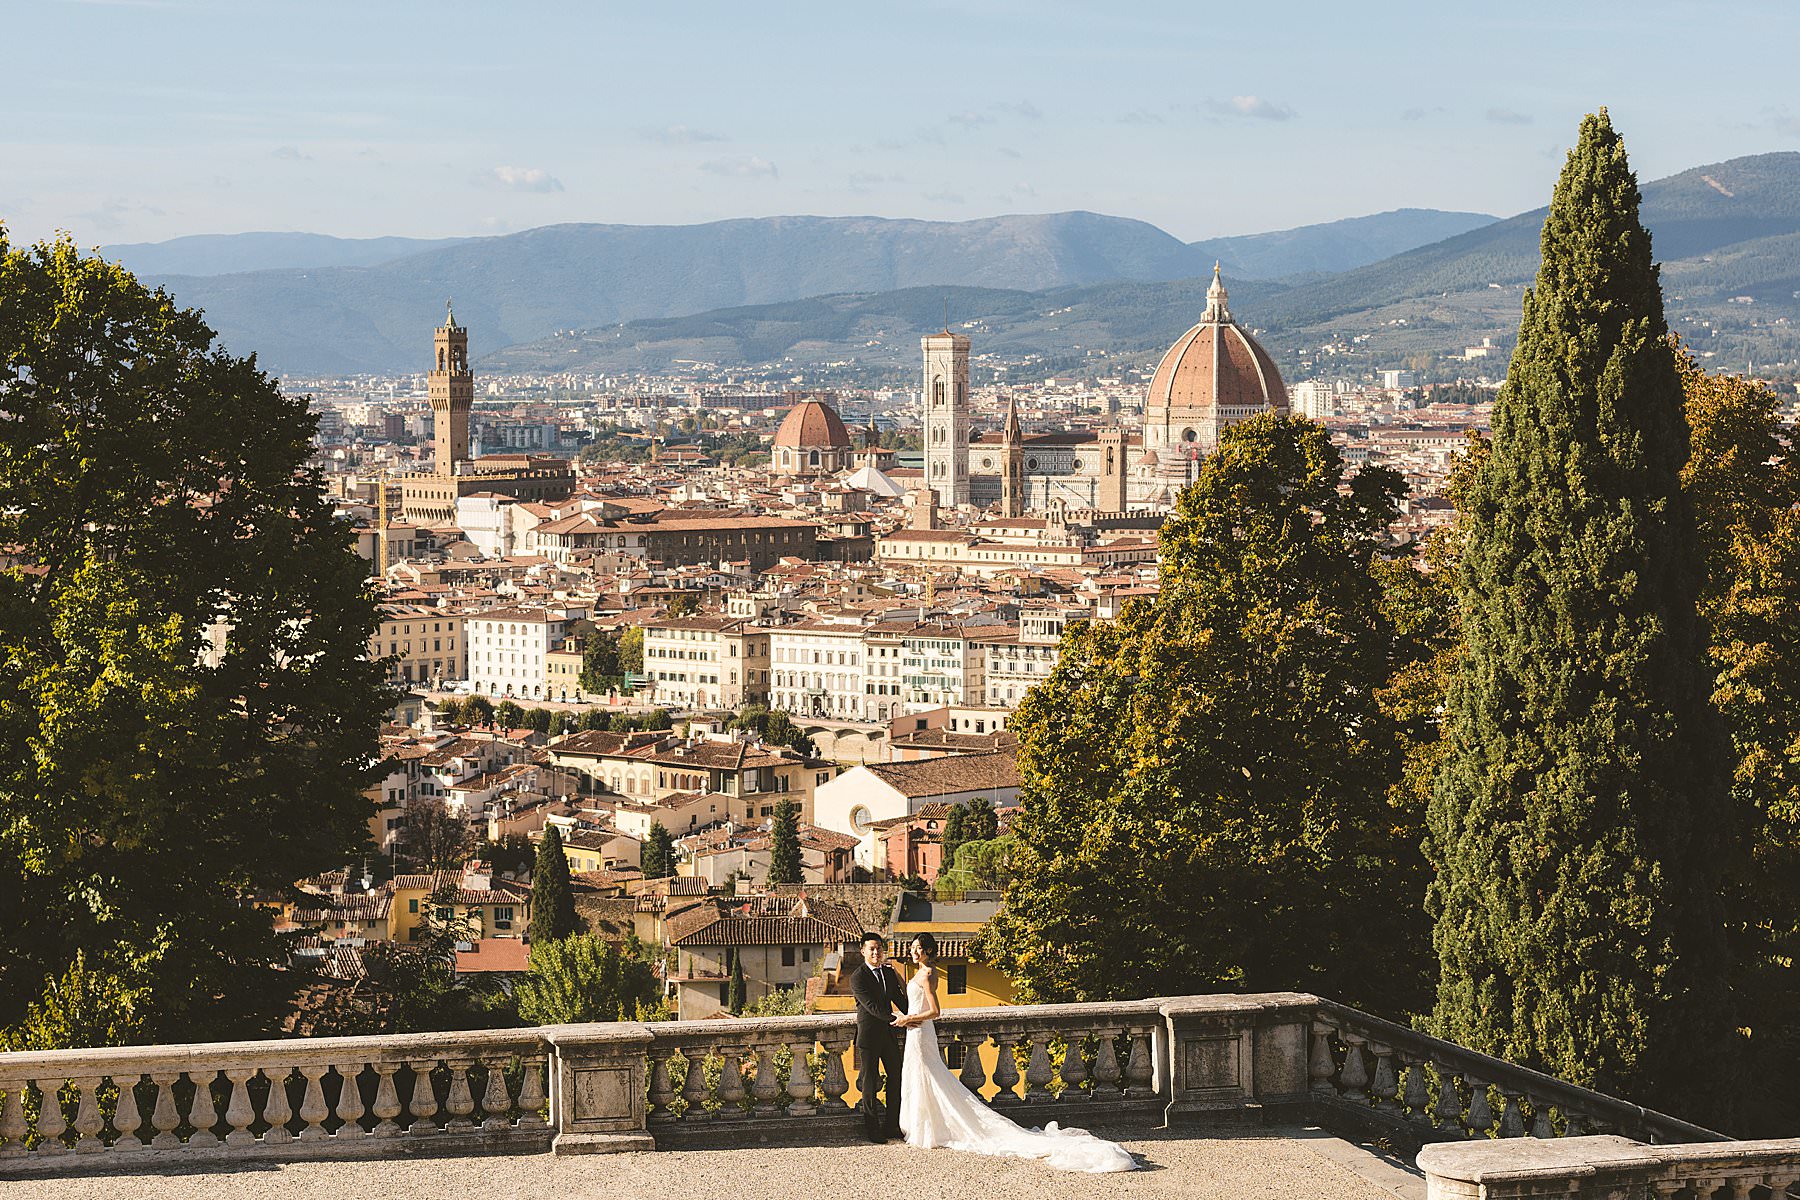 Are you planning a honeymoon in Florence? Make it truly unforgettable thanks to a professional photo shoot, wearing your wedding dress or not